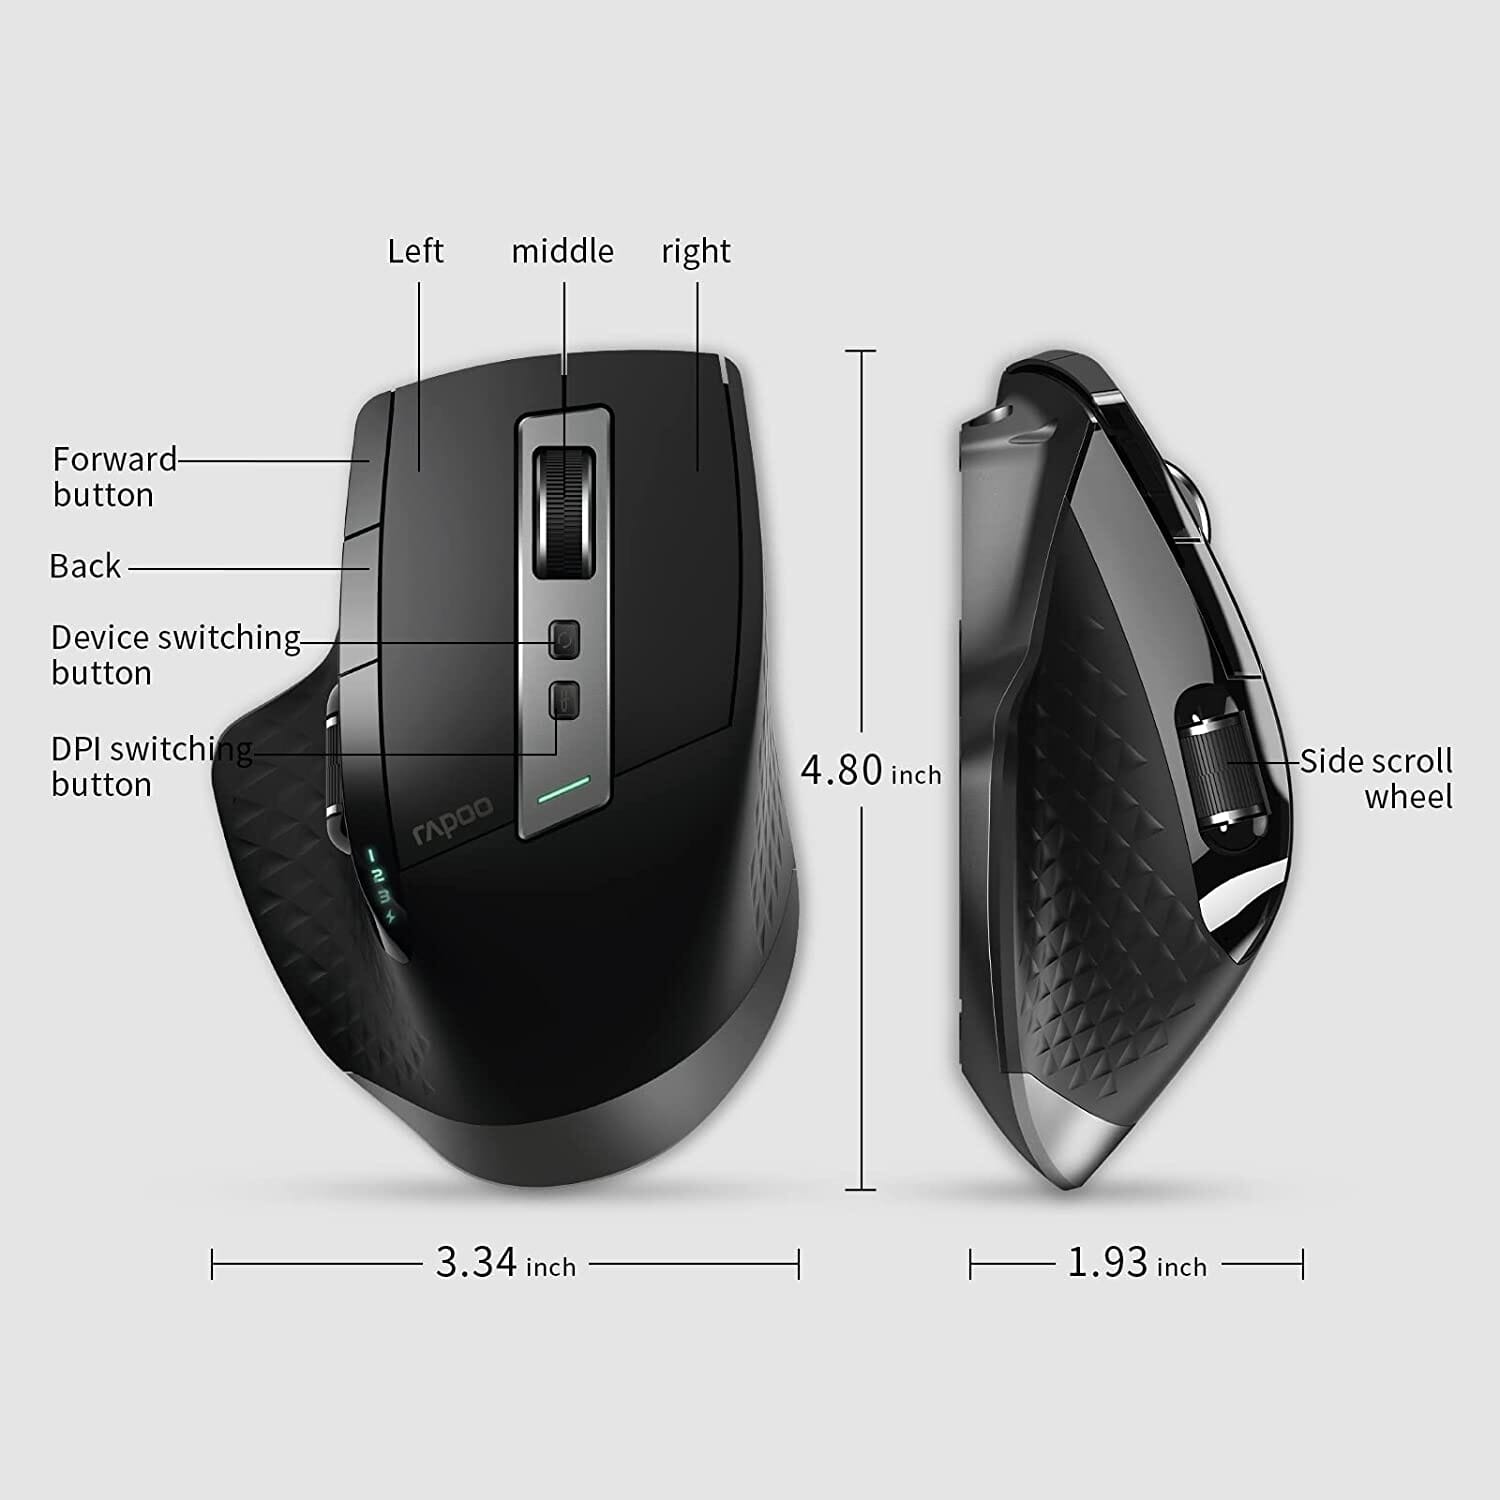 Rapoo MT750 Multi-Mode Rechargeable Wireless Mouse - Experience Ultimate Control and Precision in Gaming - Up to 30 Days of Intense Gaming Sessions Computer Electronics PikNik 